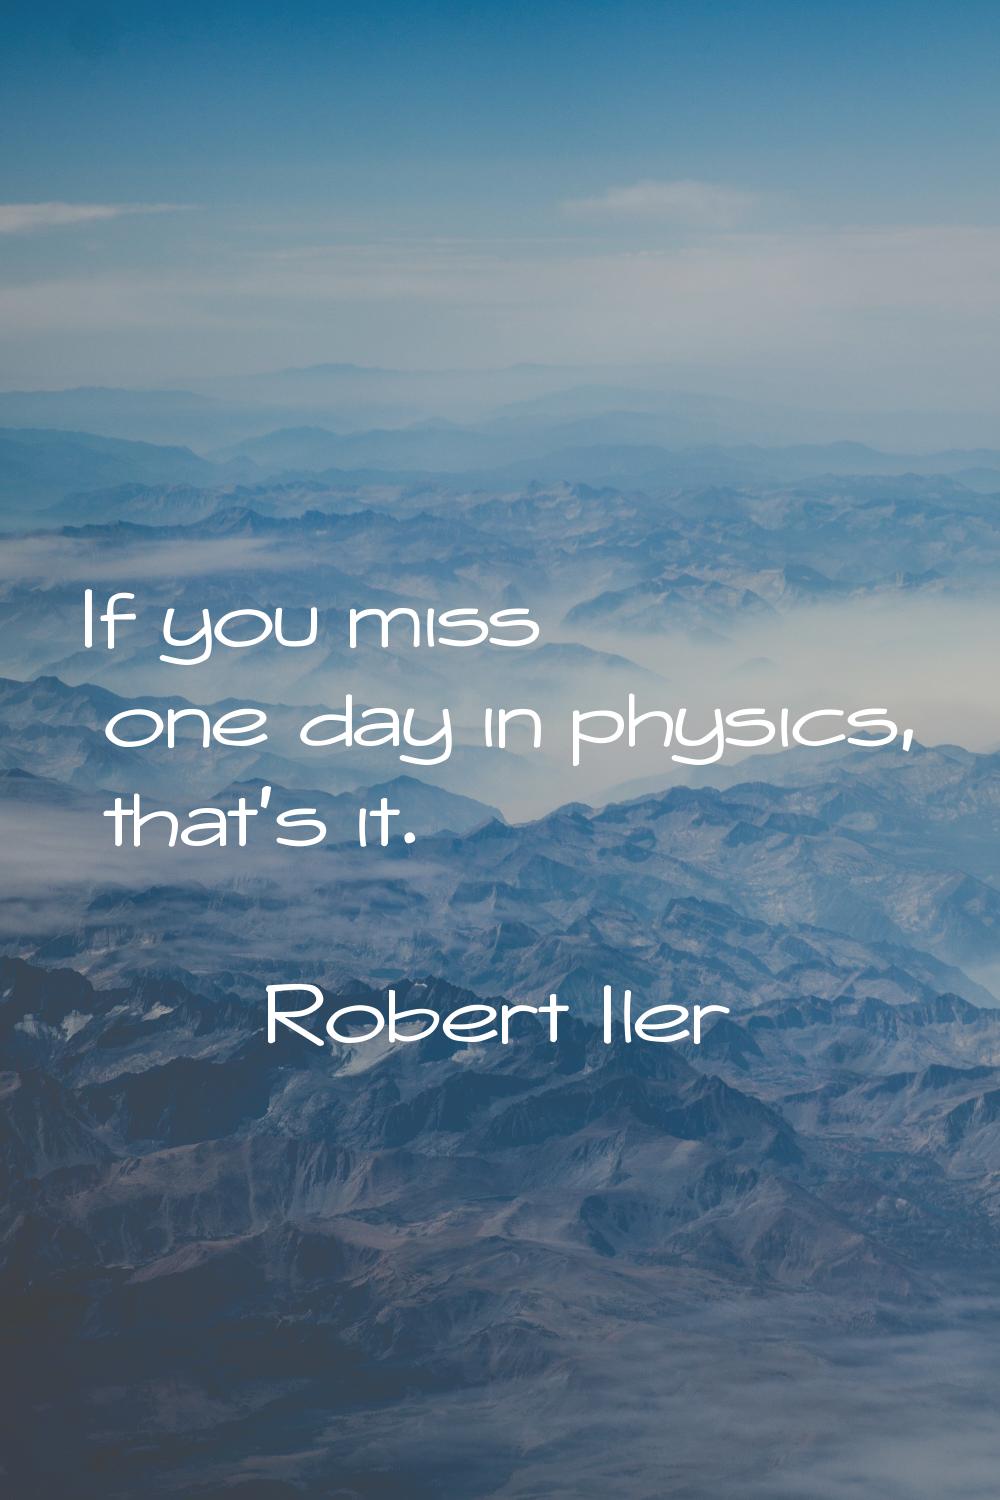 If you miss one day in physics, that's it.